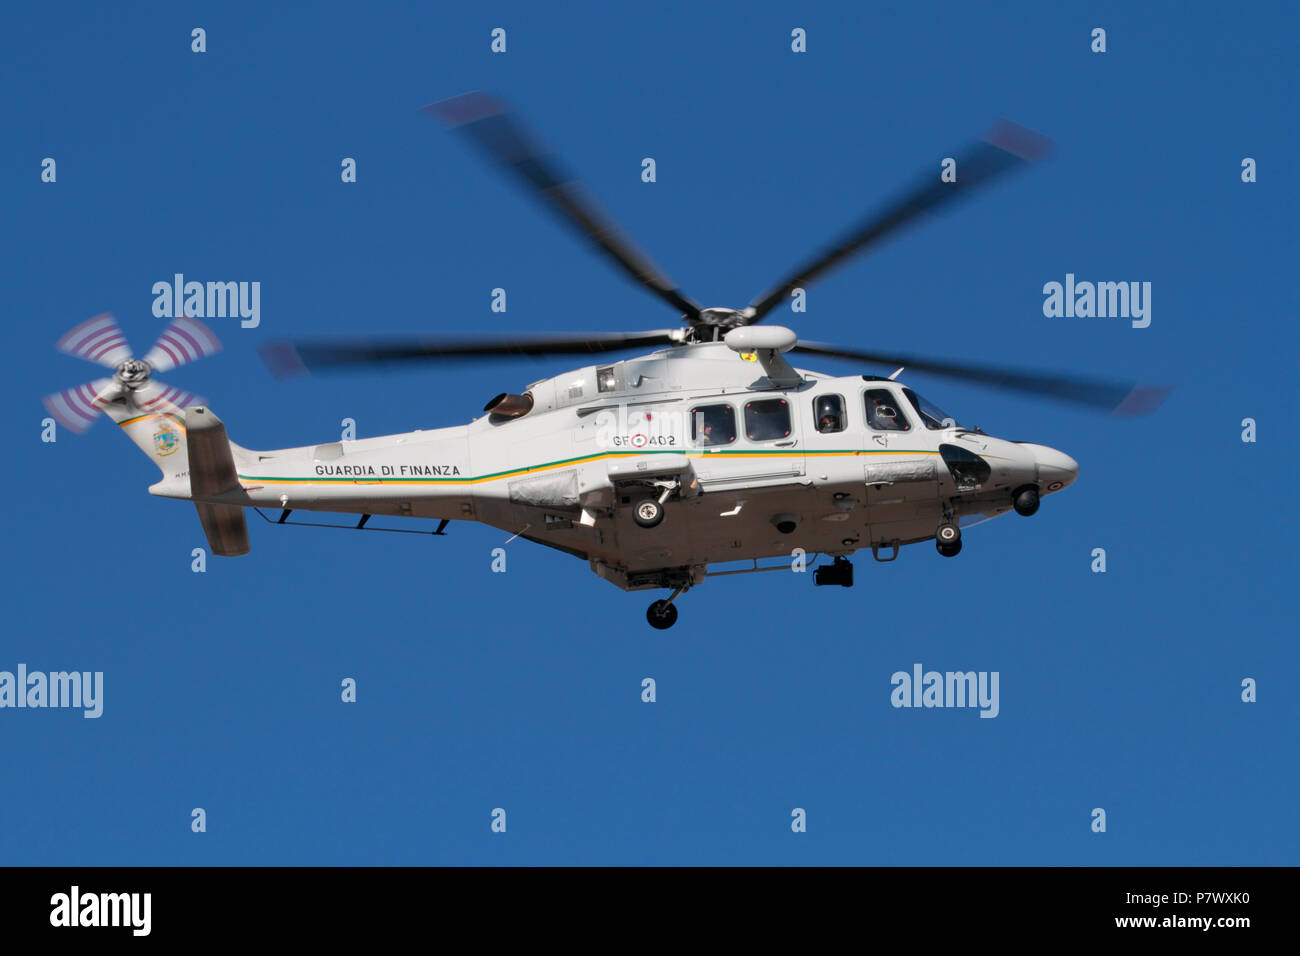 Helicopter flying. AgustaWestland AW139 of the Italian Guardia di Finanza or Customs Guard in flight against a clear blue sky Stock Photo